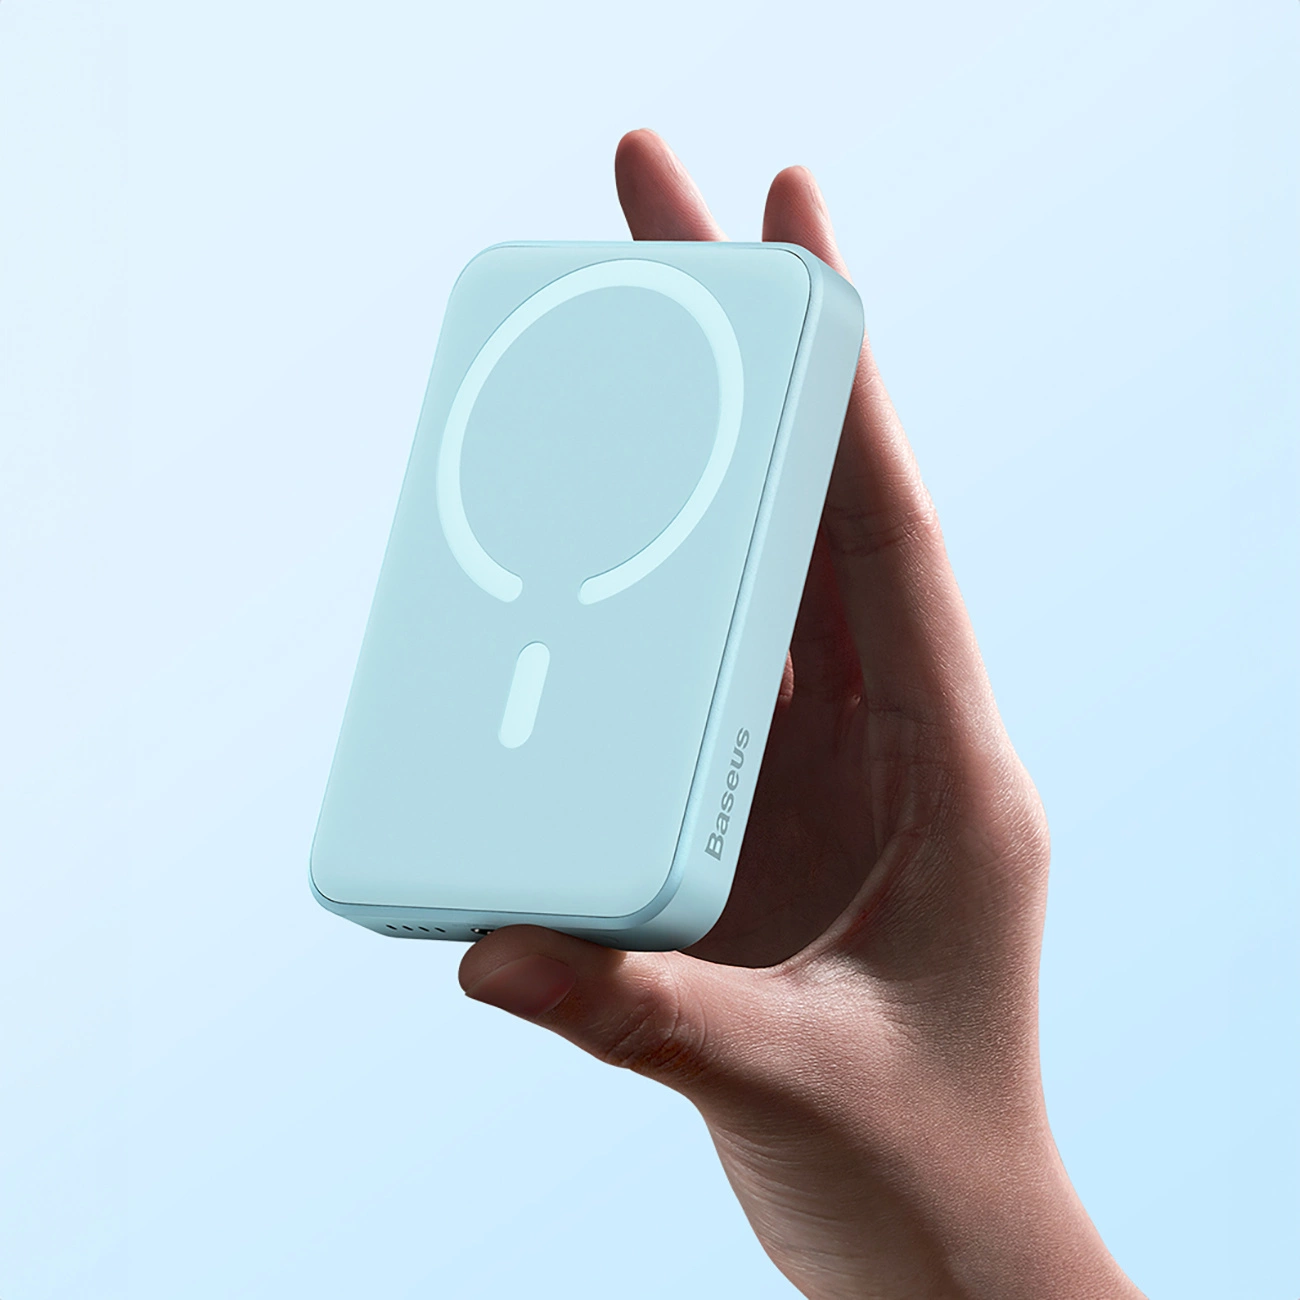 Baseus Magnetic Mini induction powerbank in the hand, facing upwards. The device shows an induction module